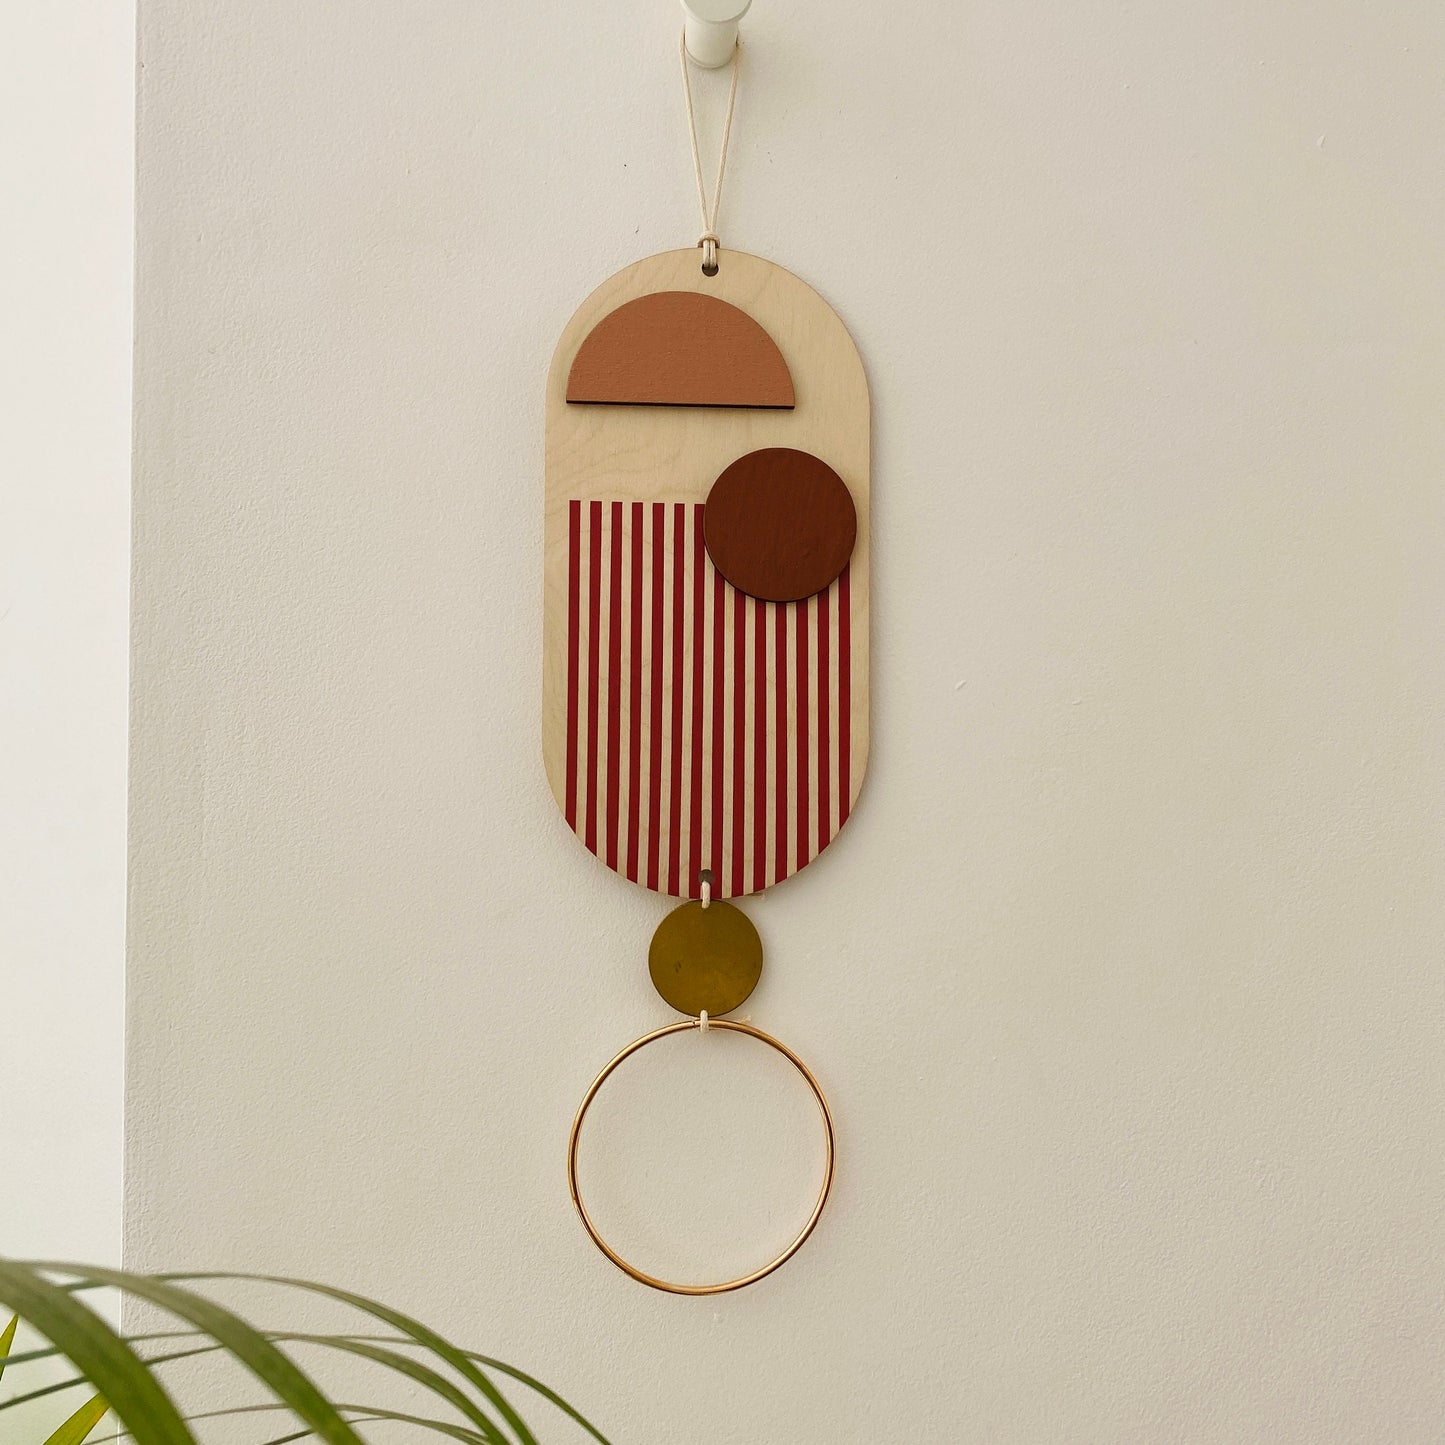 Small Wall Hanging - Modern Wall Art - Contemporary Home Decor - Brass Wall Art - Pink and Red Decor - Wood Decor - Hanging Wall Art